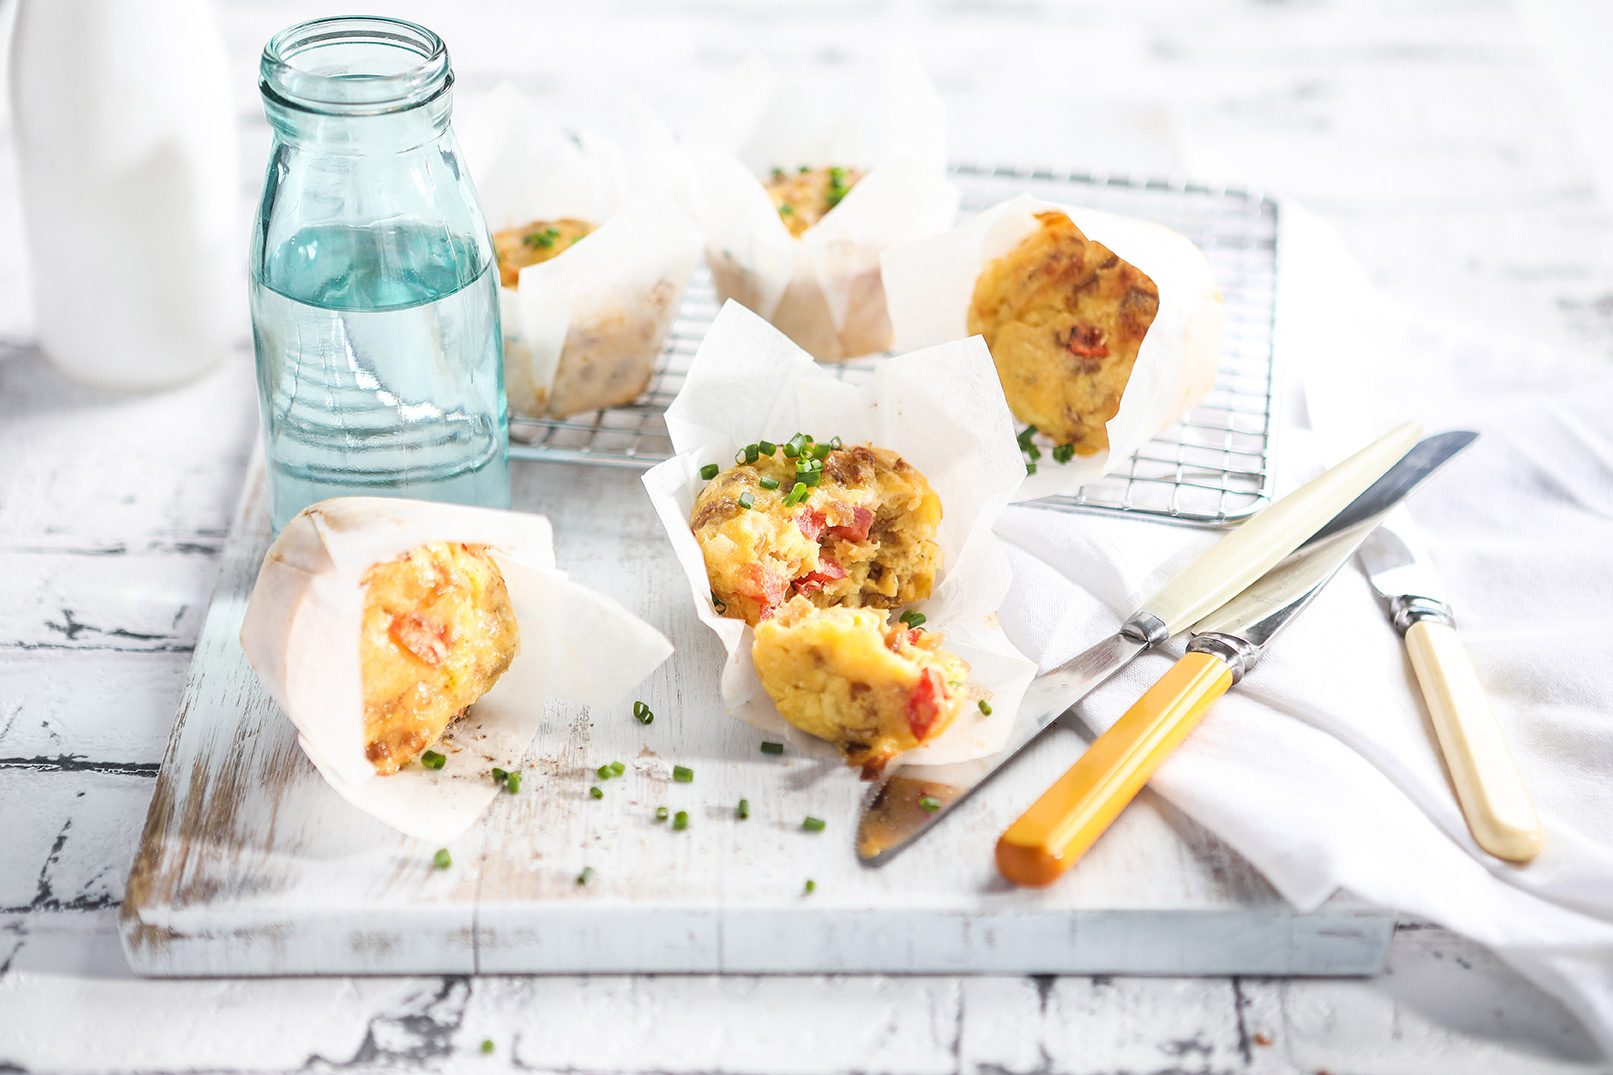 Image of baked easy savoury muffins in baking paper on a white cutting board and cooling rack with knives and a glass jug of water on the side. 